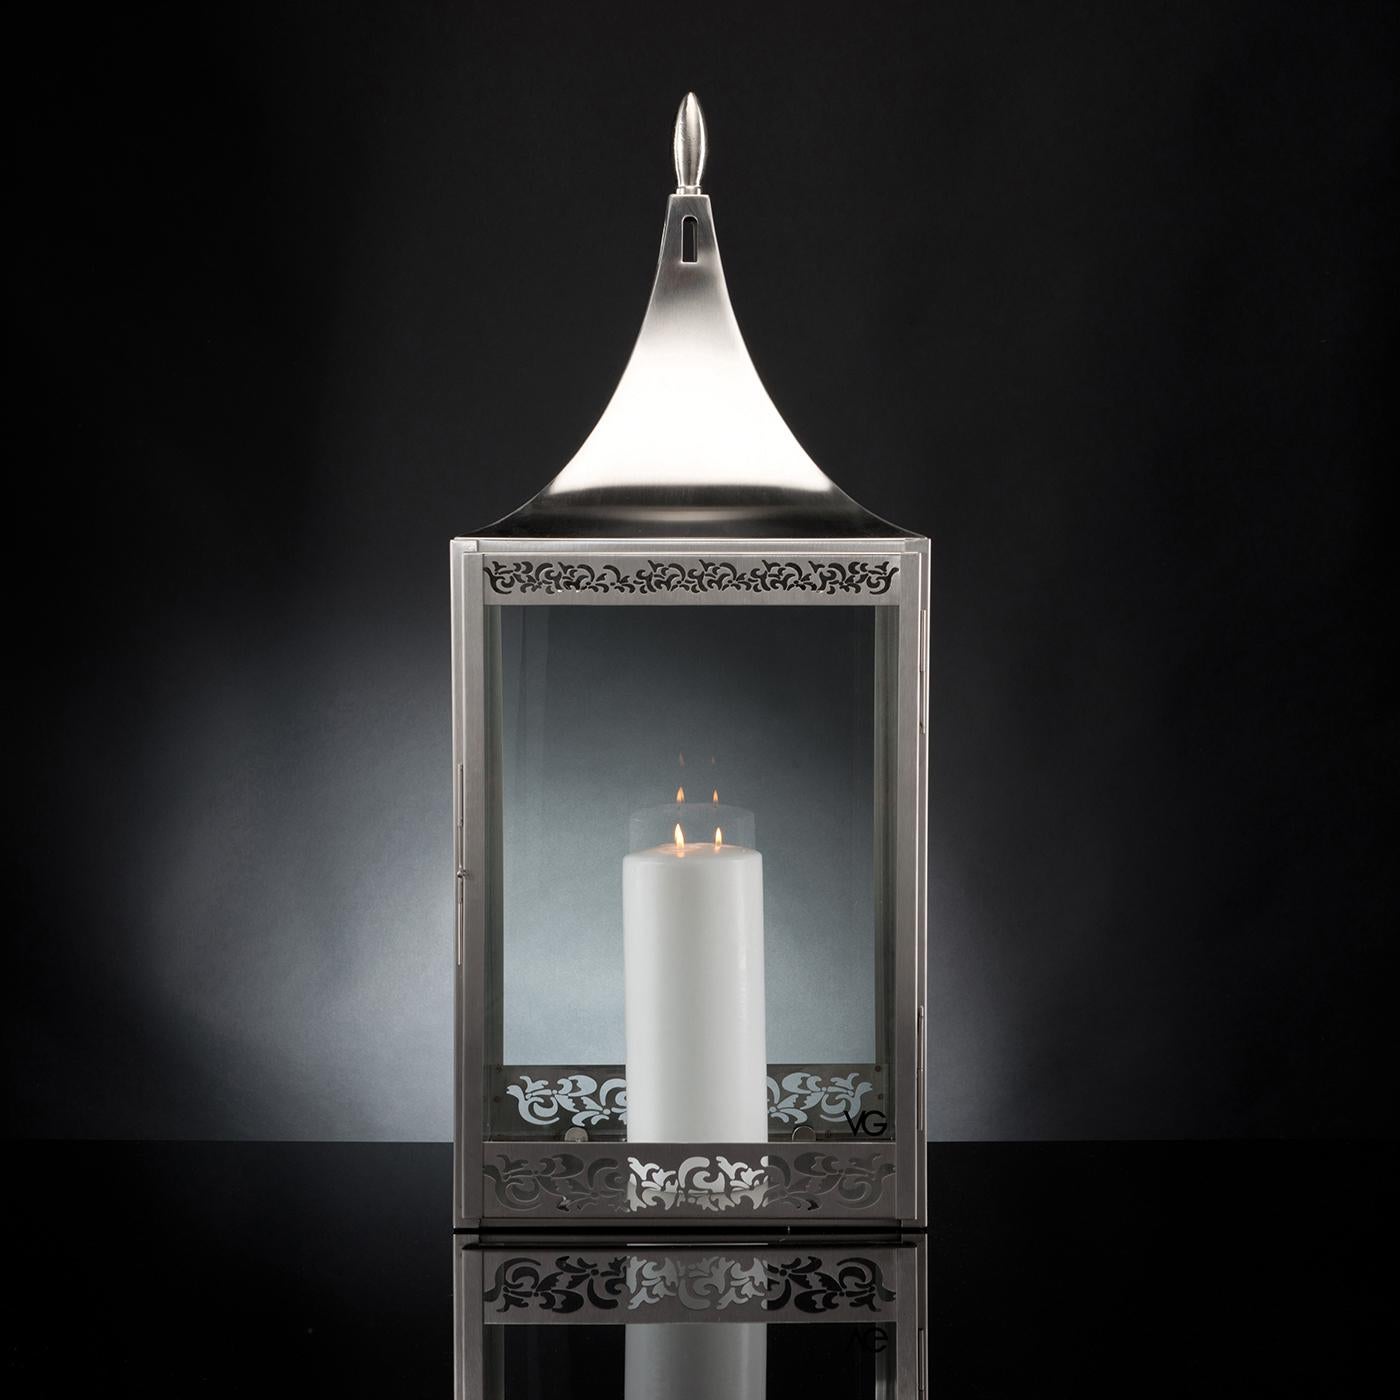 An exquisite showcase of craftsmanship, this lantern is handmade of satin-finished steel. A modern piece of ancient inspiration, it is adorned with a superb floral motif boasting strong visual and textural value enhancing its profile. The piece is